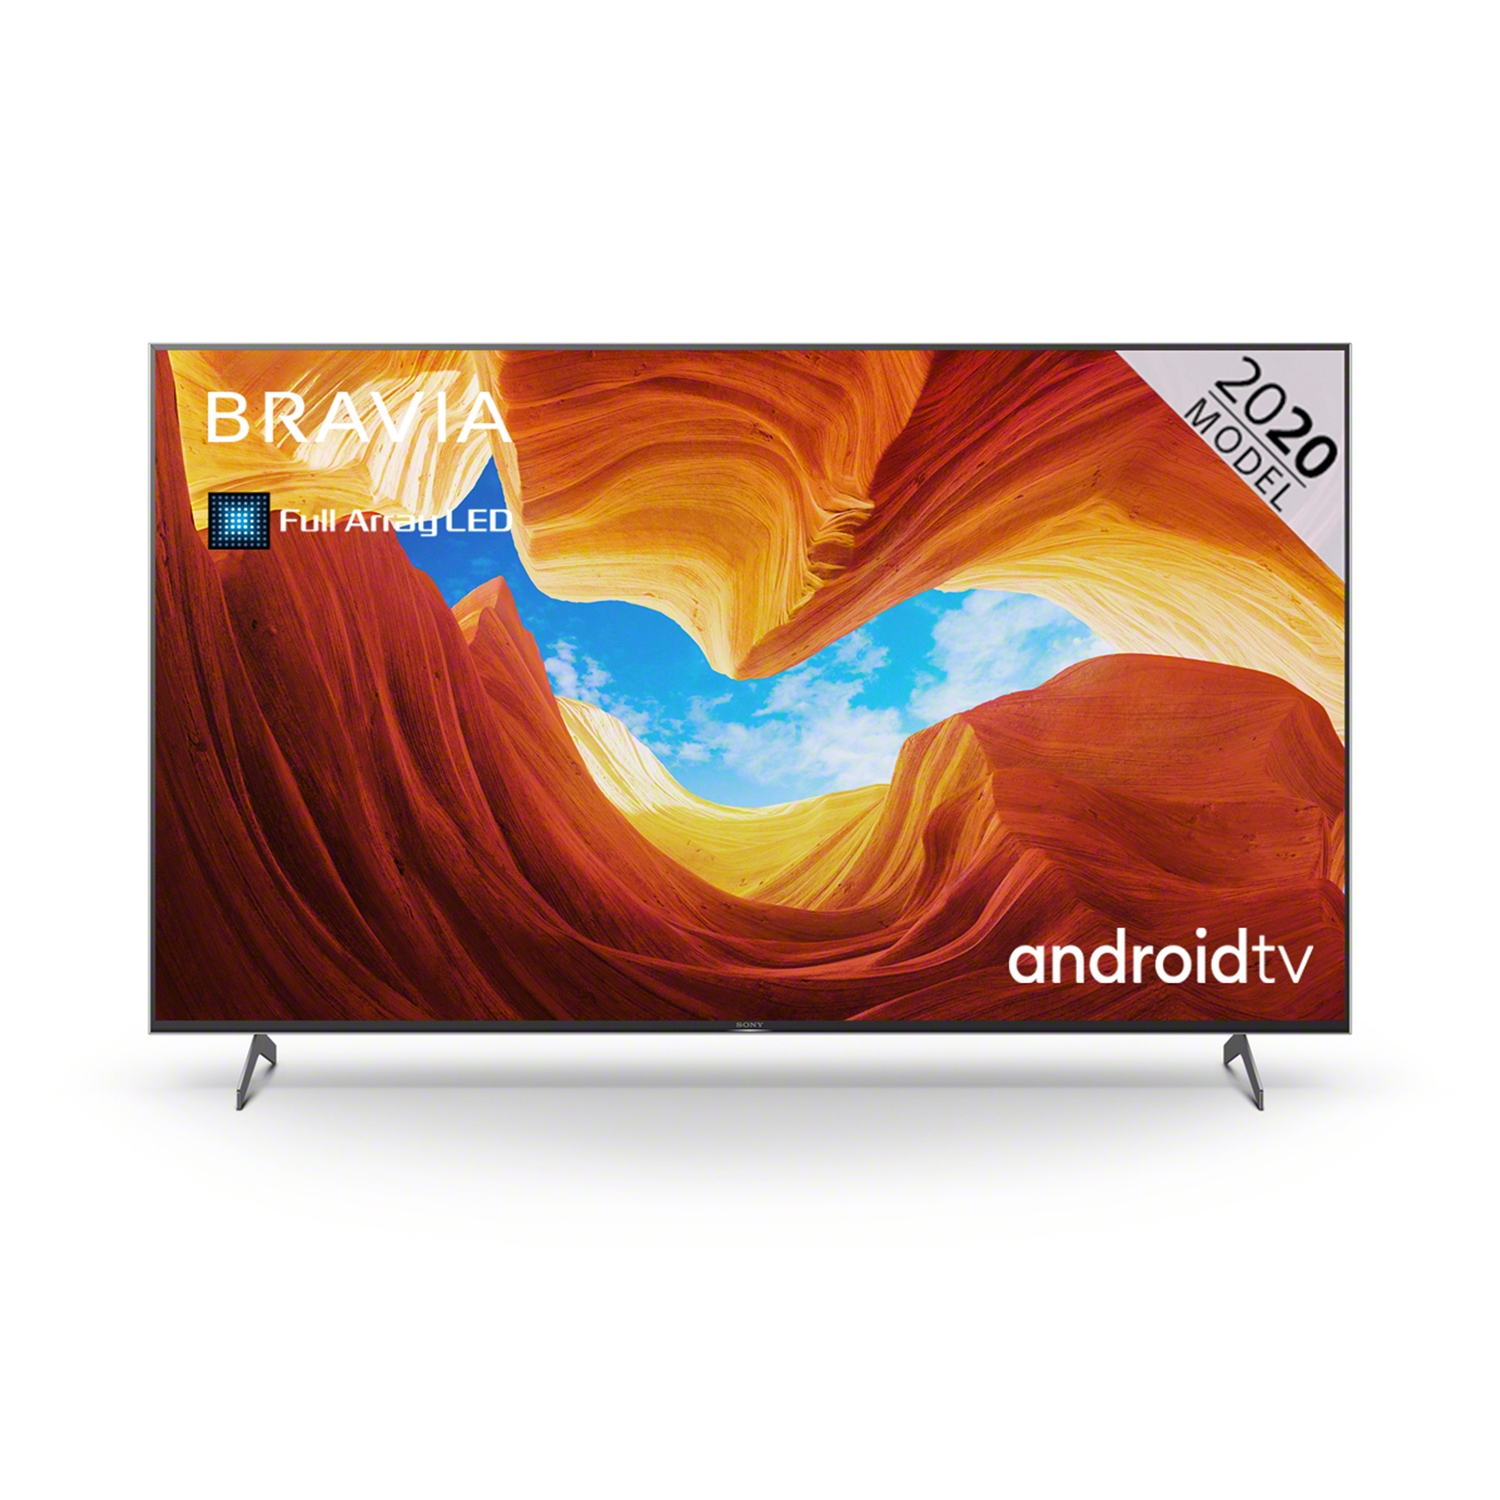 Sony 65" 4K HDR Full Array LED Android TV with X-Motion Clarity & Google Assistant - 0